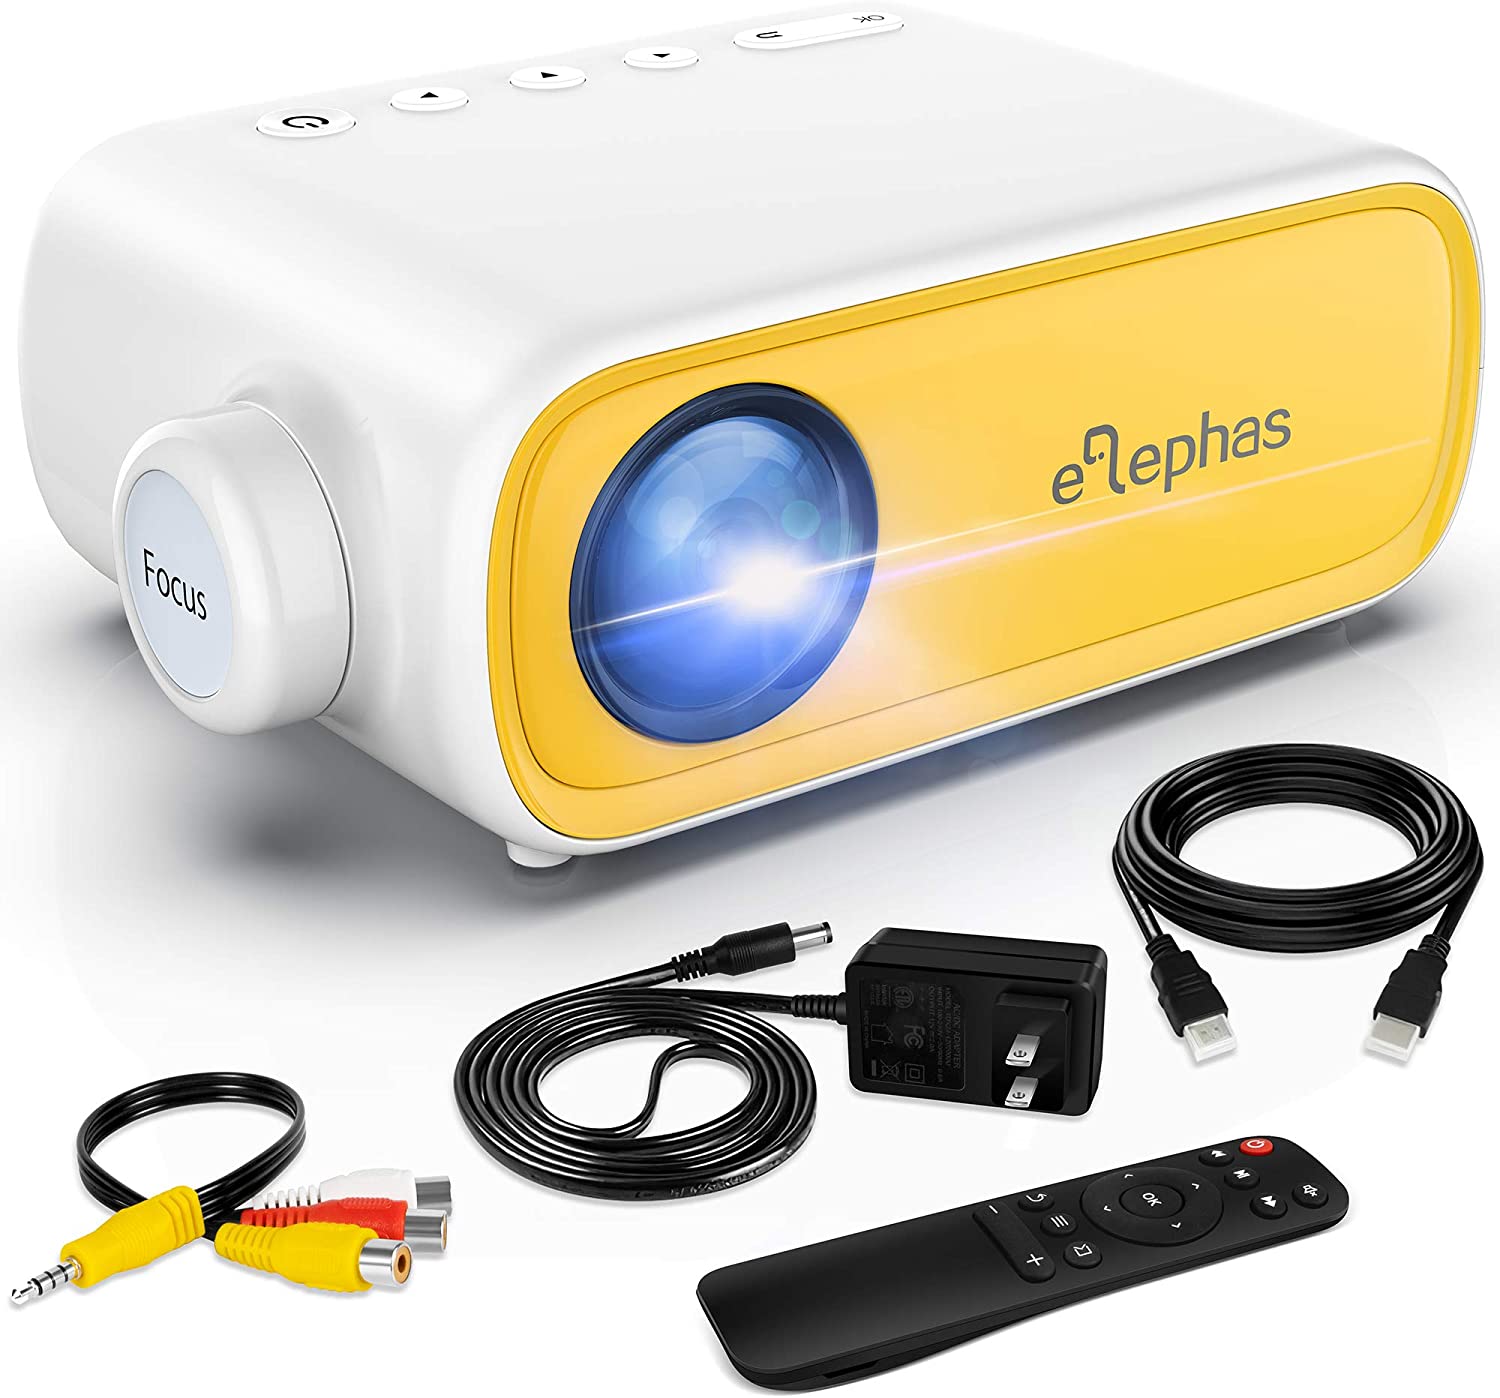 ELEPHAS YG280 Projector Review, Pros & Cons